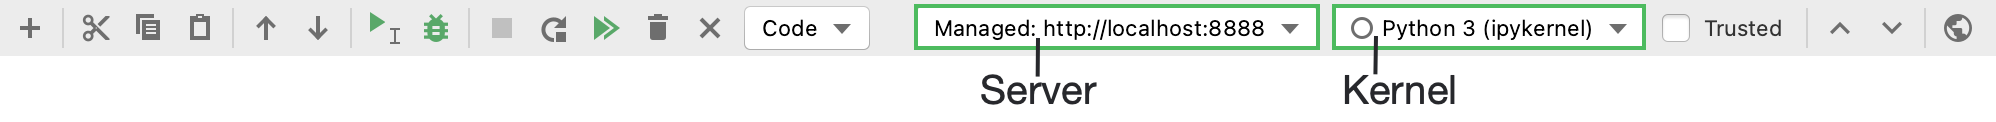 Jupyter notebook toolbar; Managed server is connected